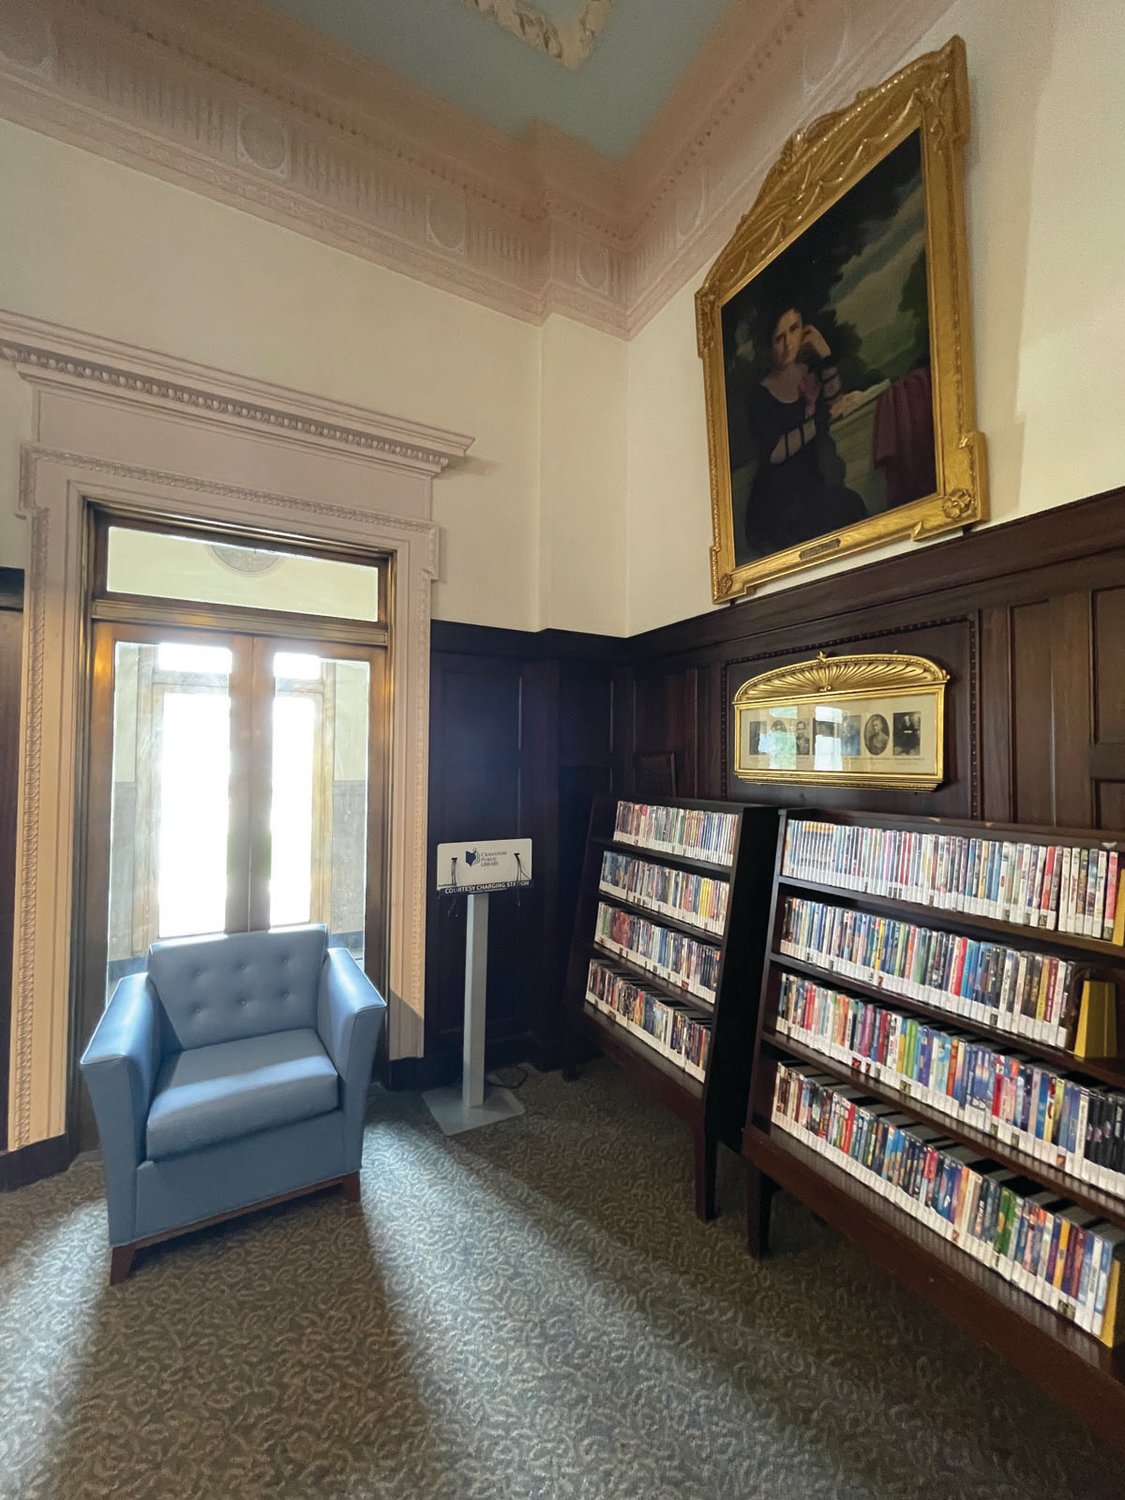 QUIET COMFORT: As part of interior improvements at the William Hall Library, several new chairs have been placed in alcove areas to provide for additional reading spaces.